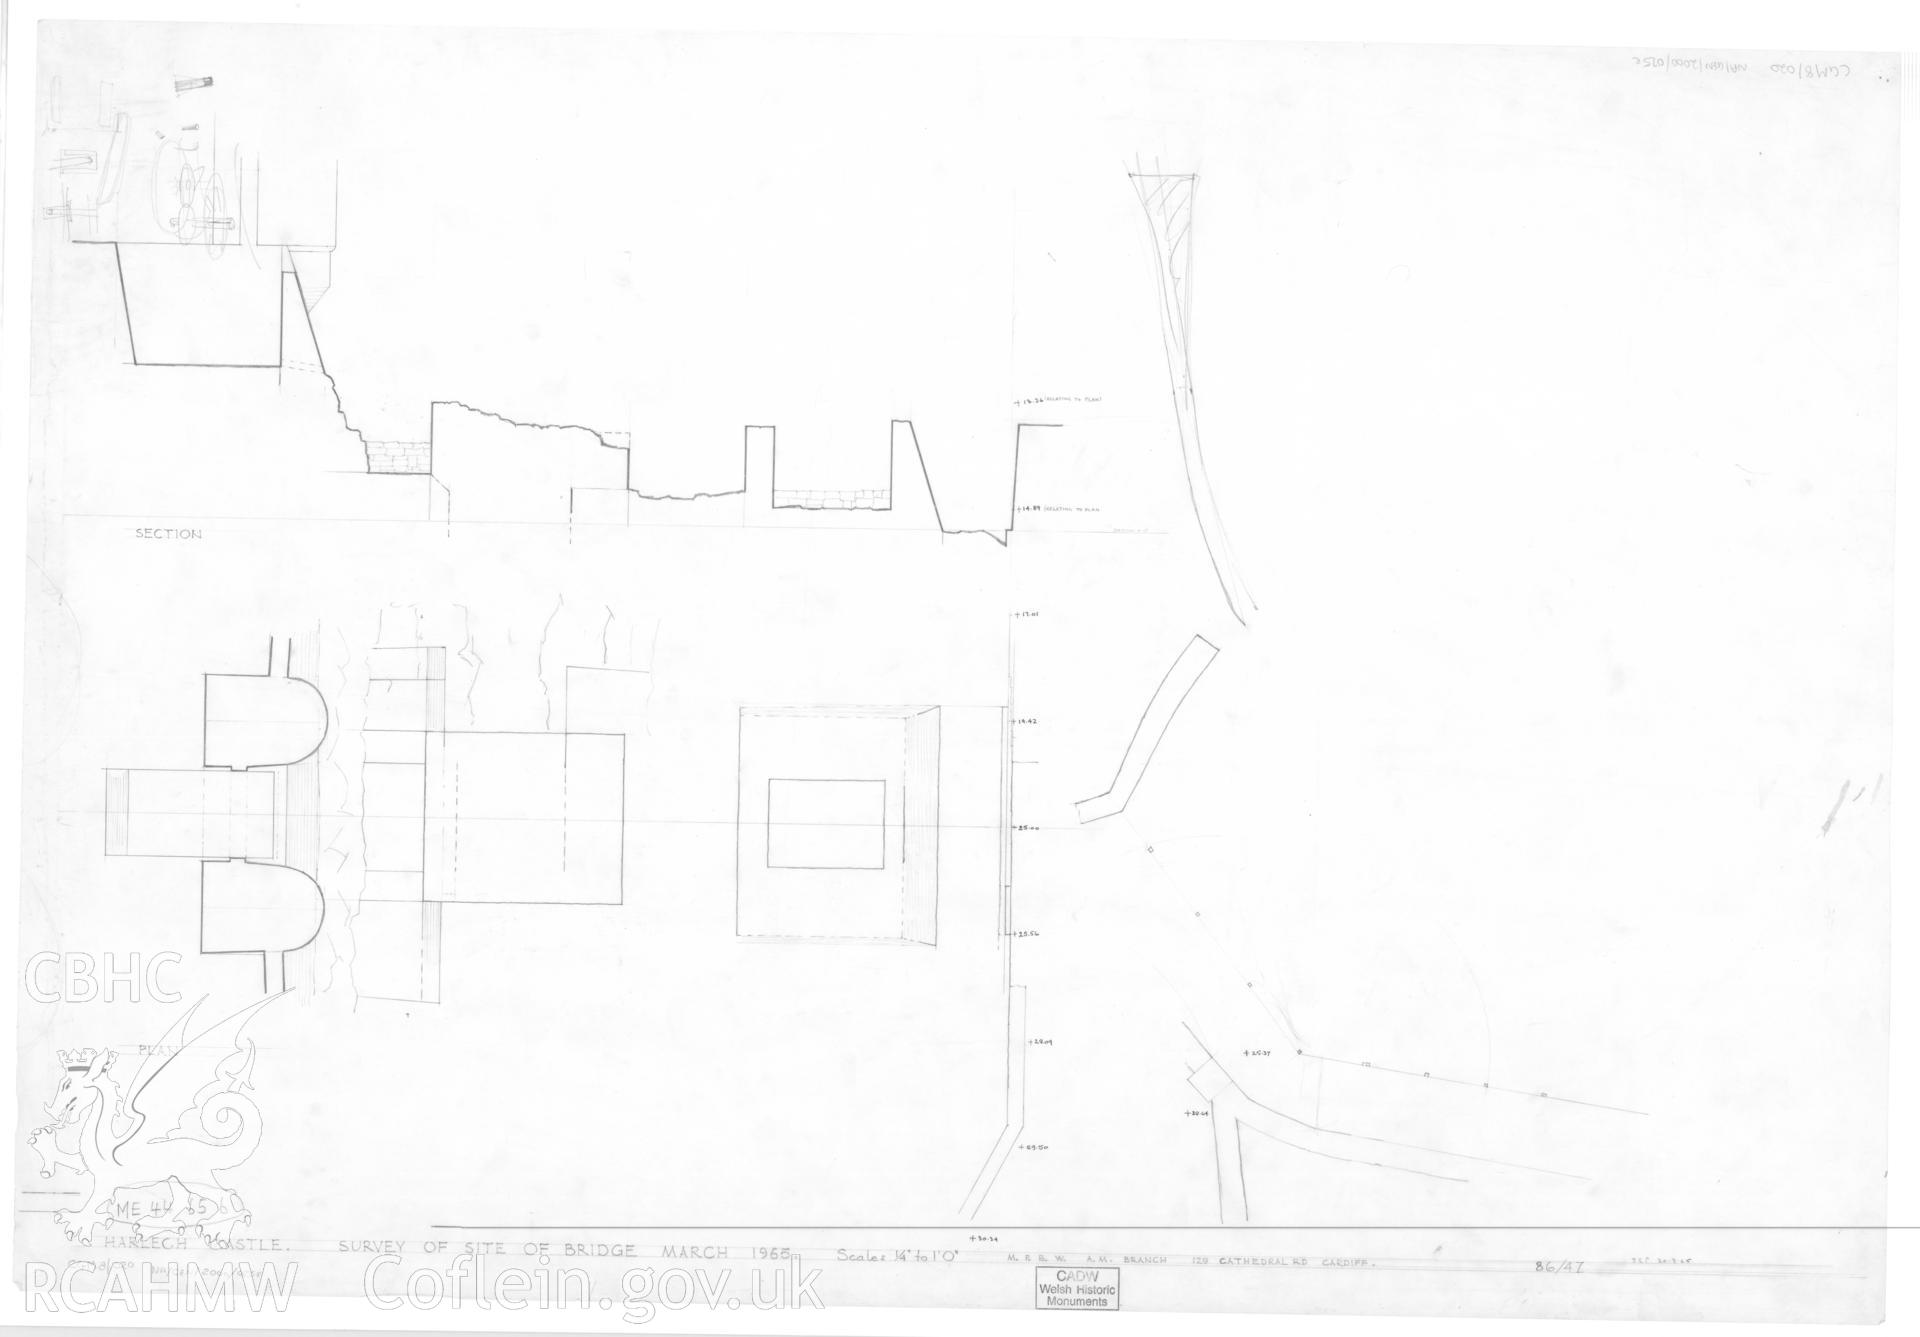 Cadw guardianship monument drawing of Harlech Castle. Entrance pits, plan + section. Cadw Ref. No:86/47. Scale 1:48.